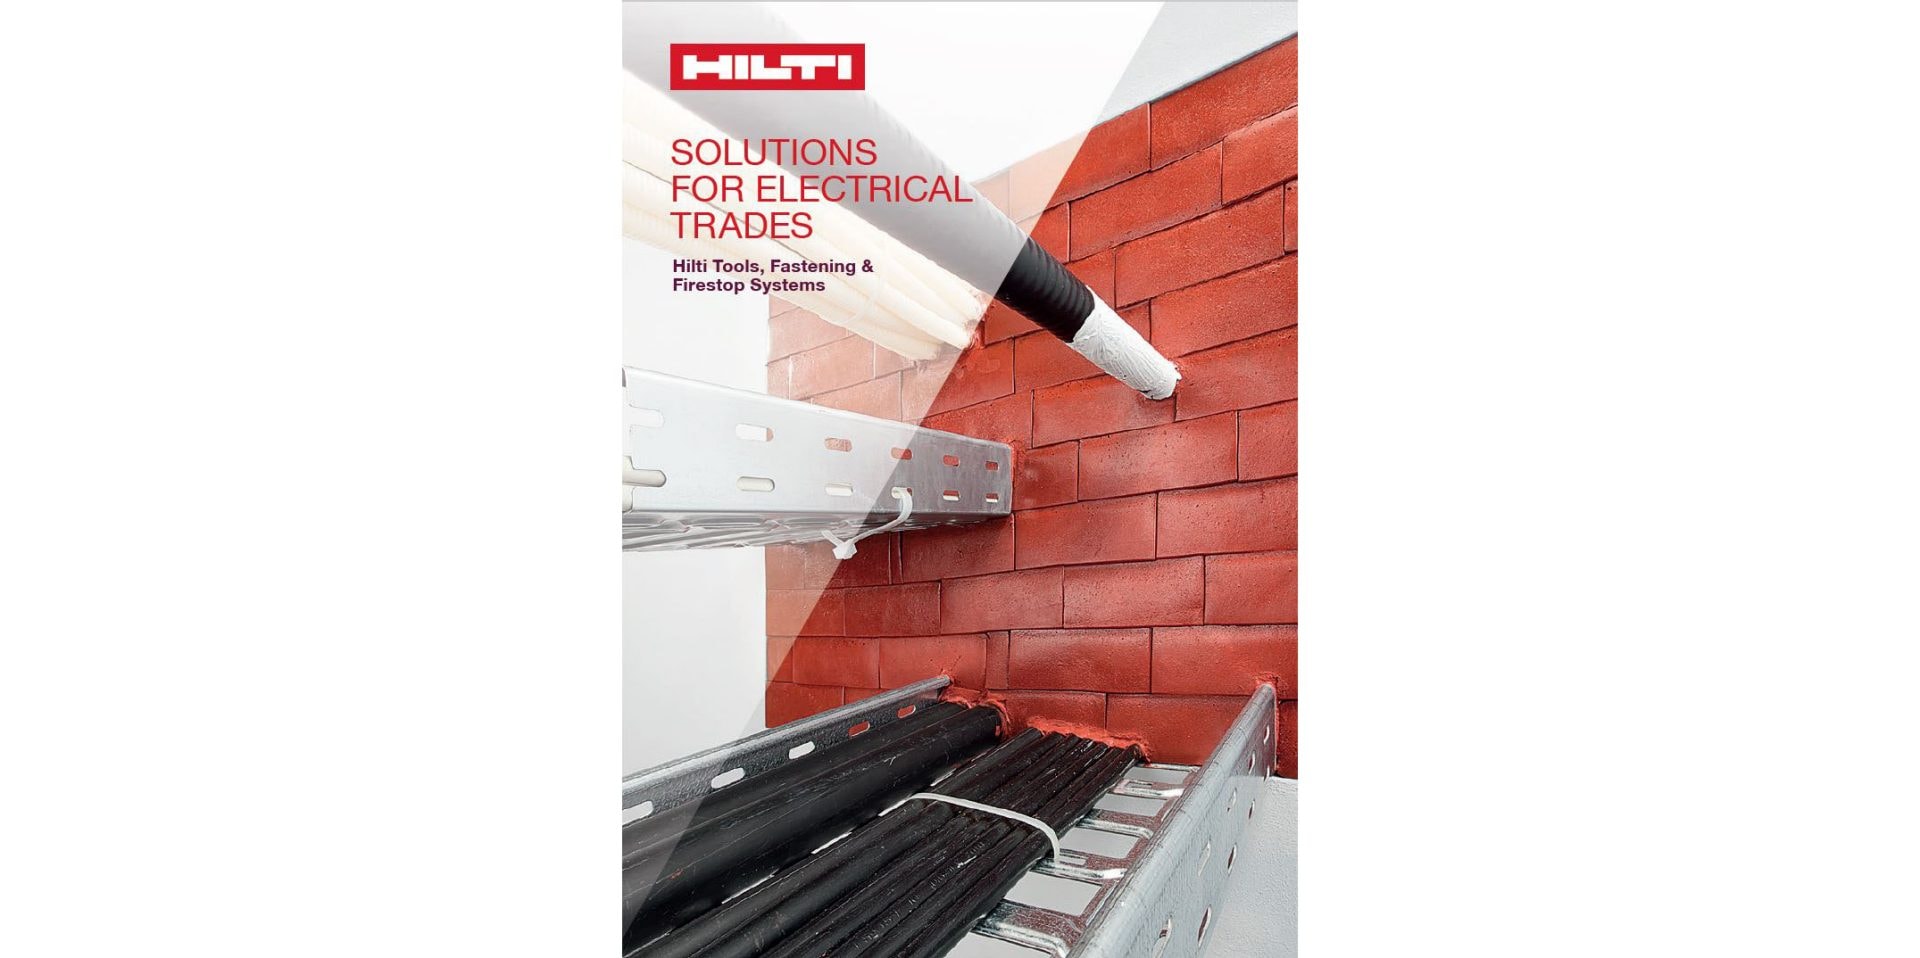 Hilti Solutions for Electrical Trades